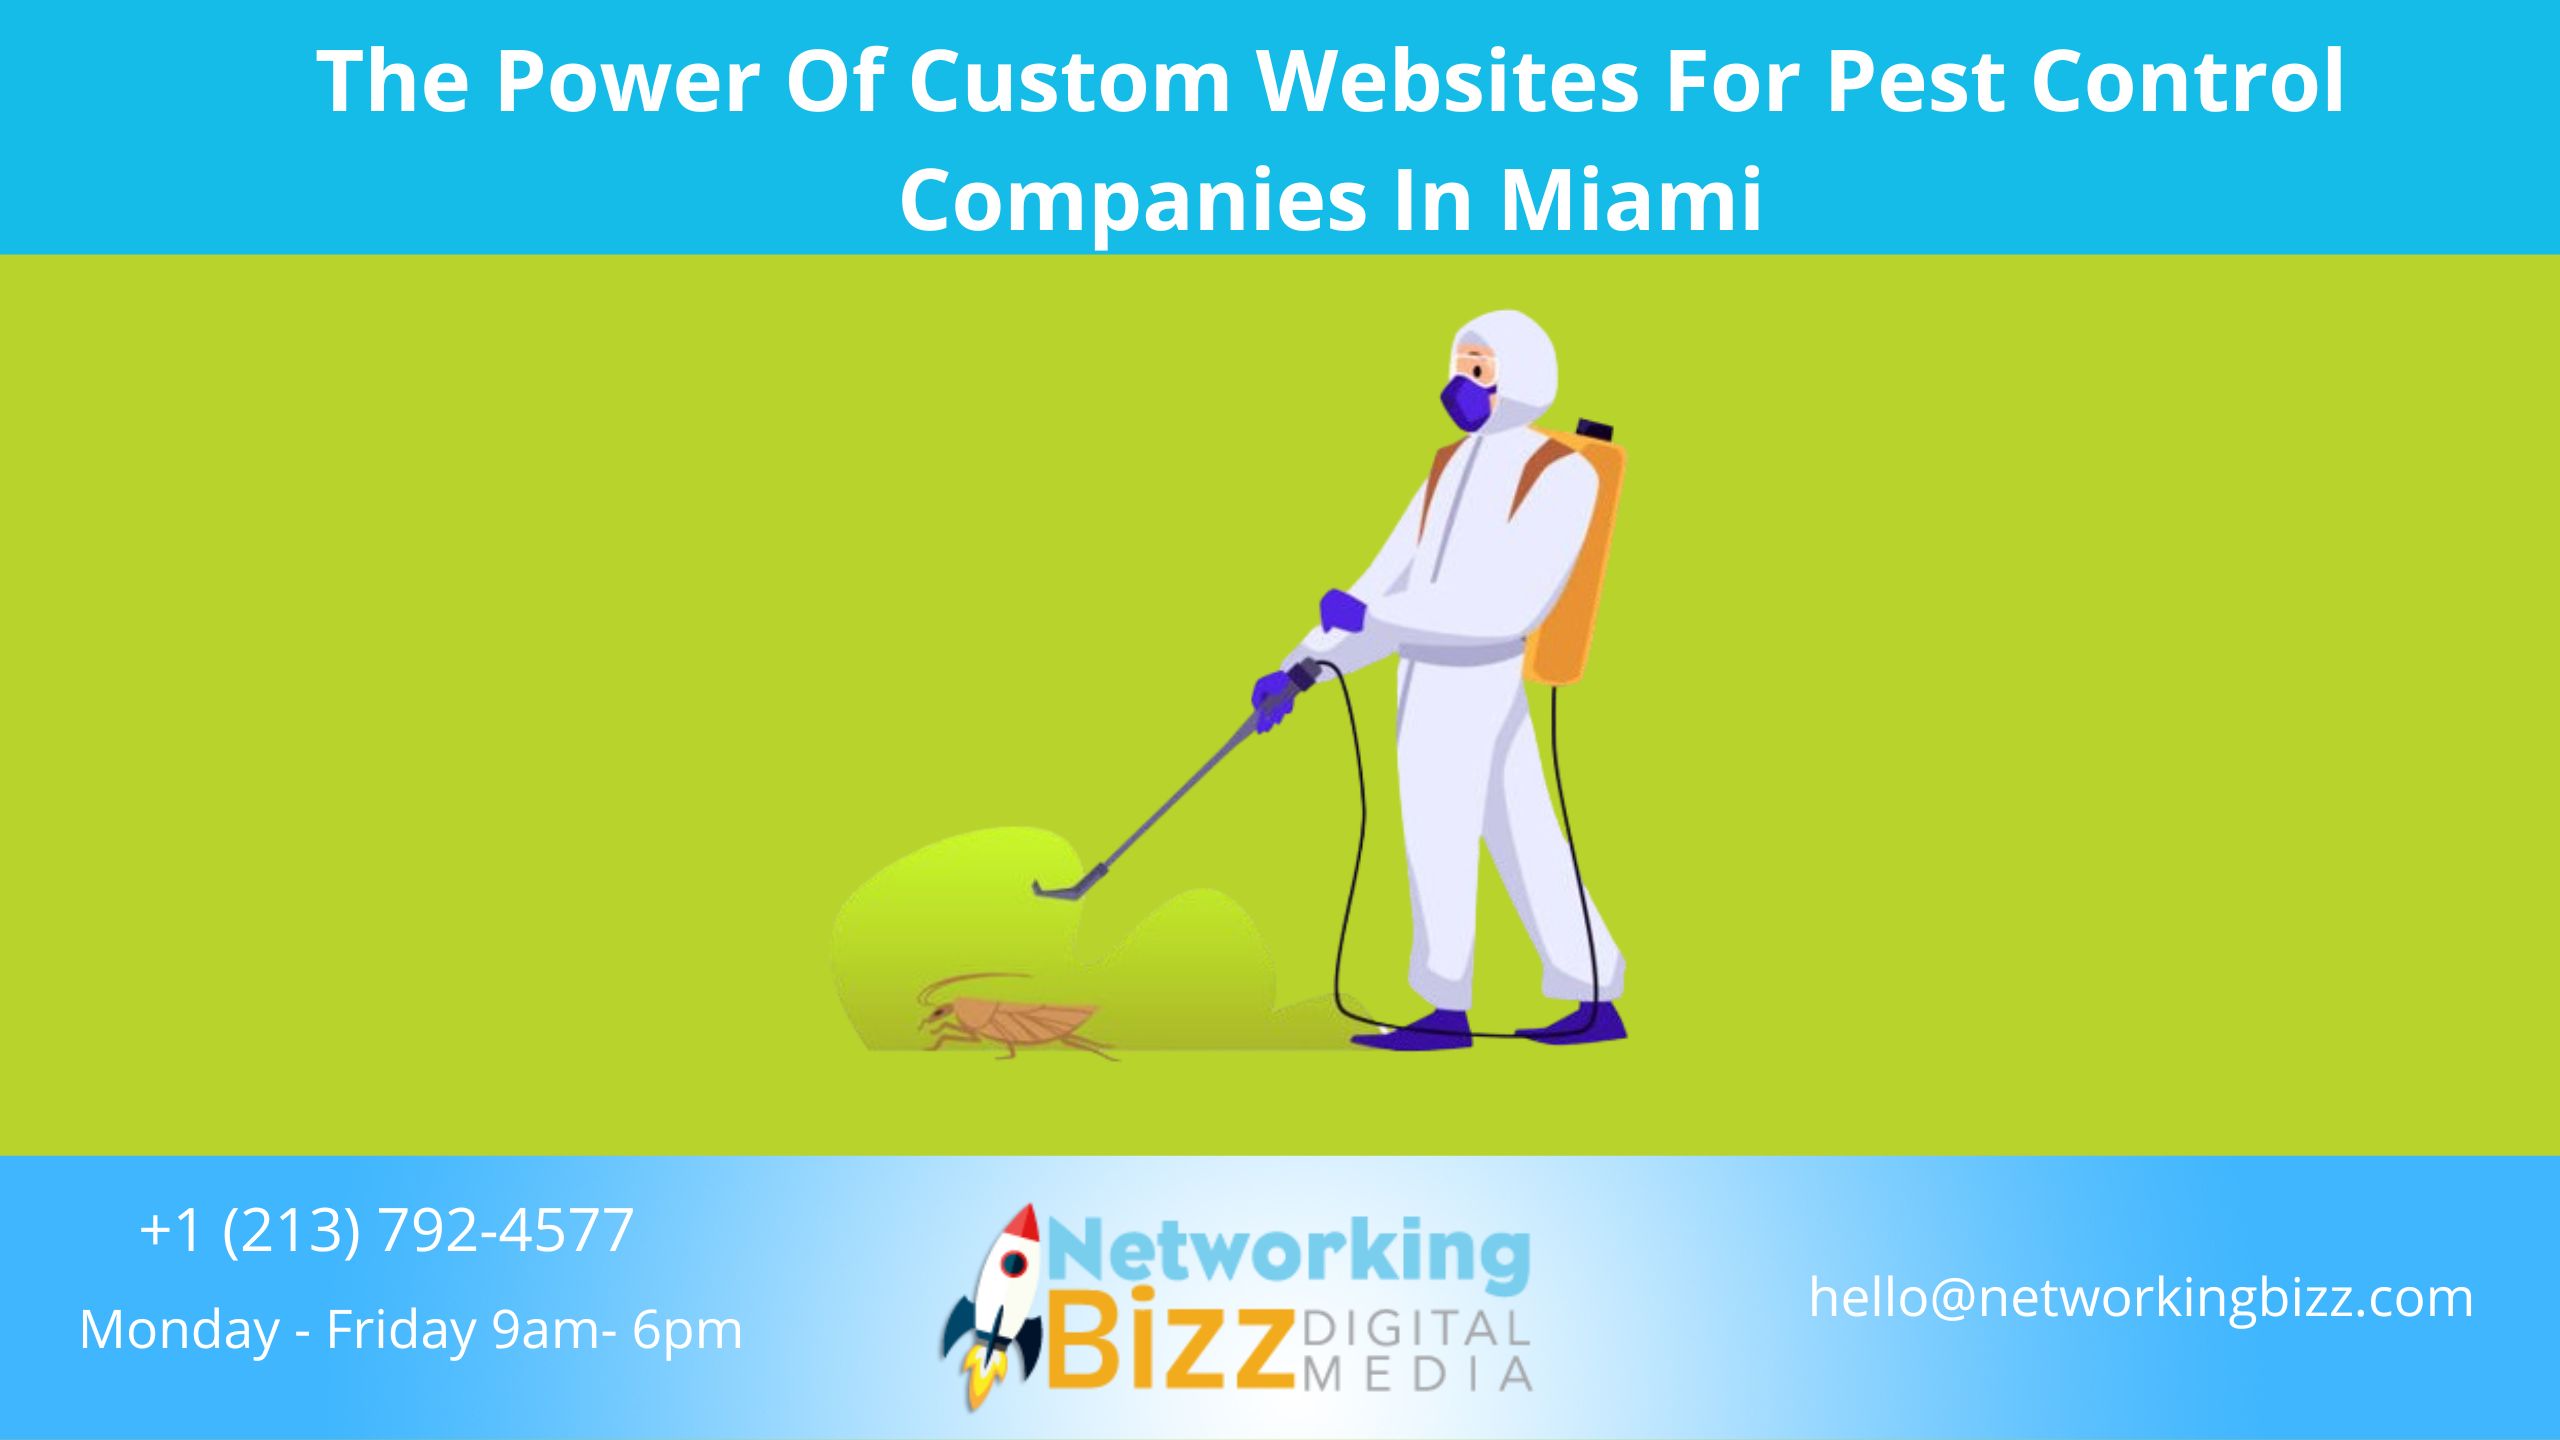 The Power Of Custom Websites For Pest Control Companies In Miami